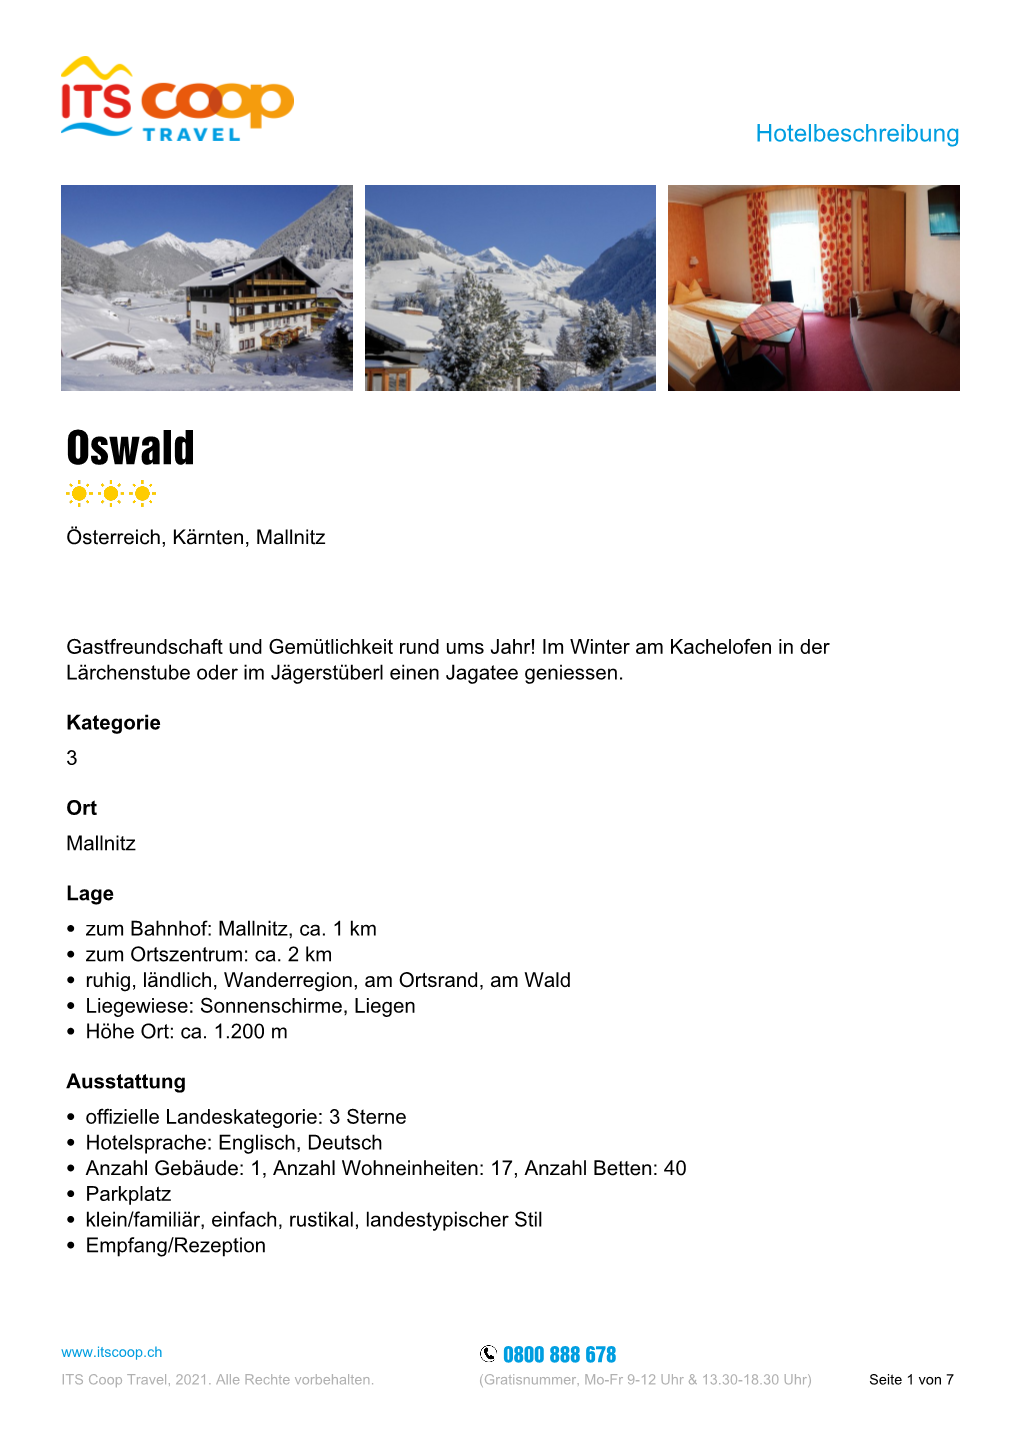 Hotel Pension Oswald